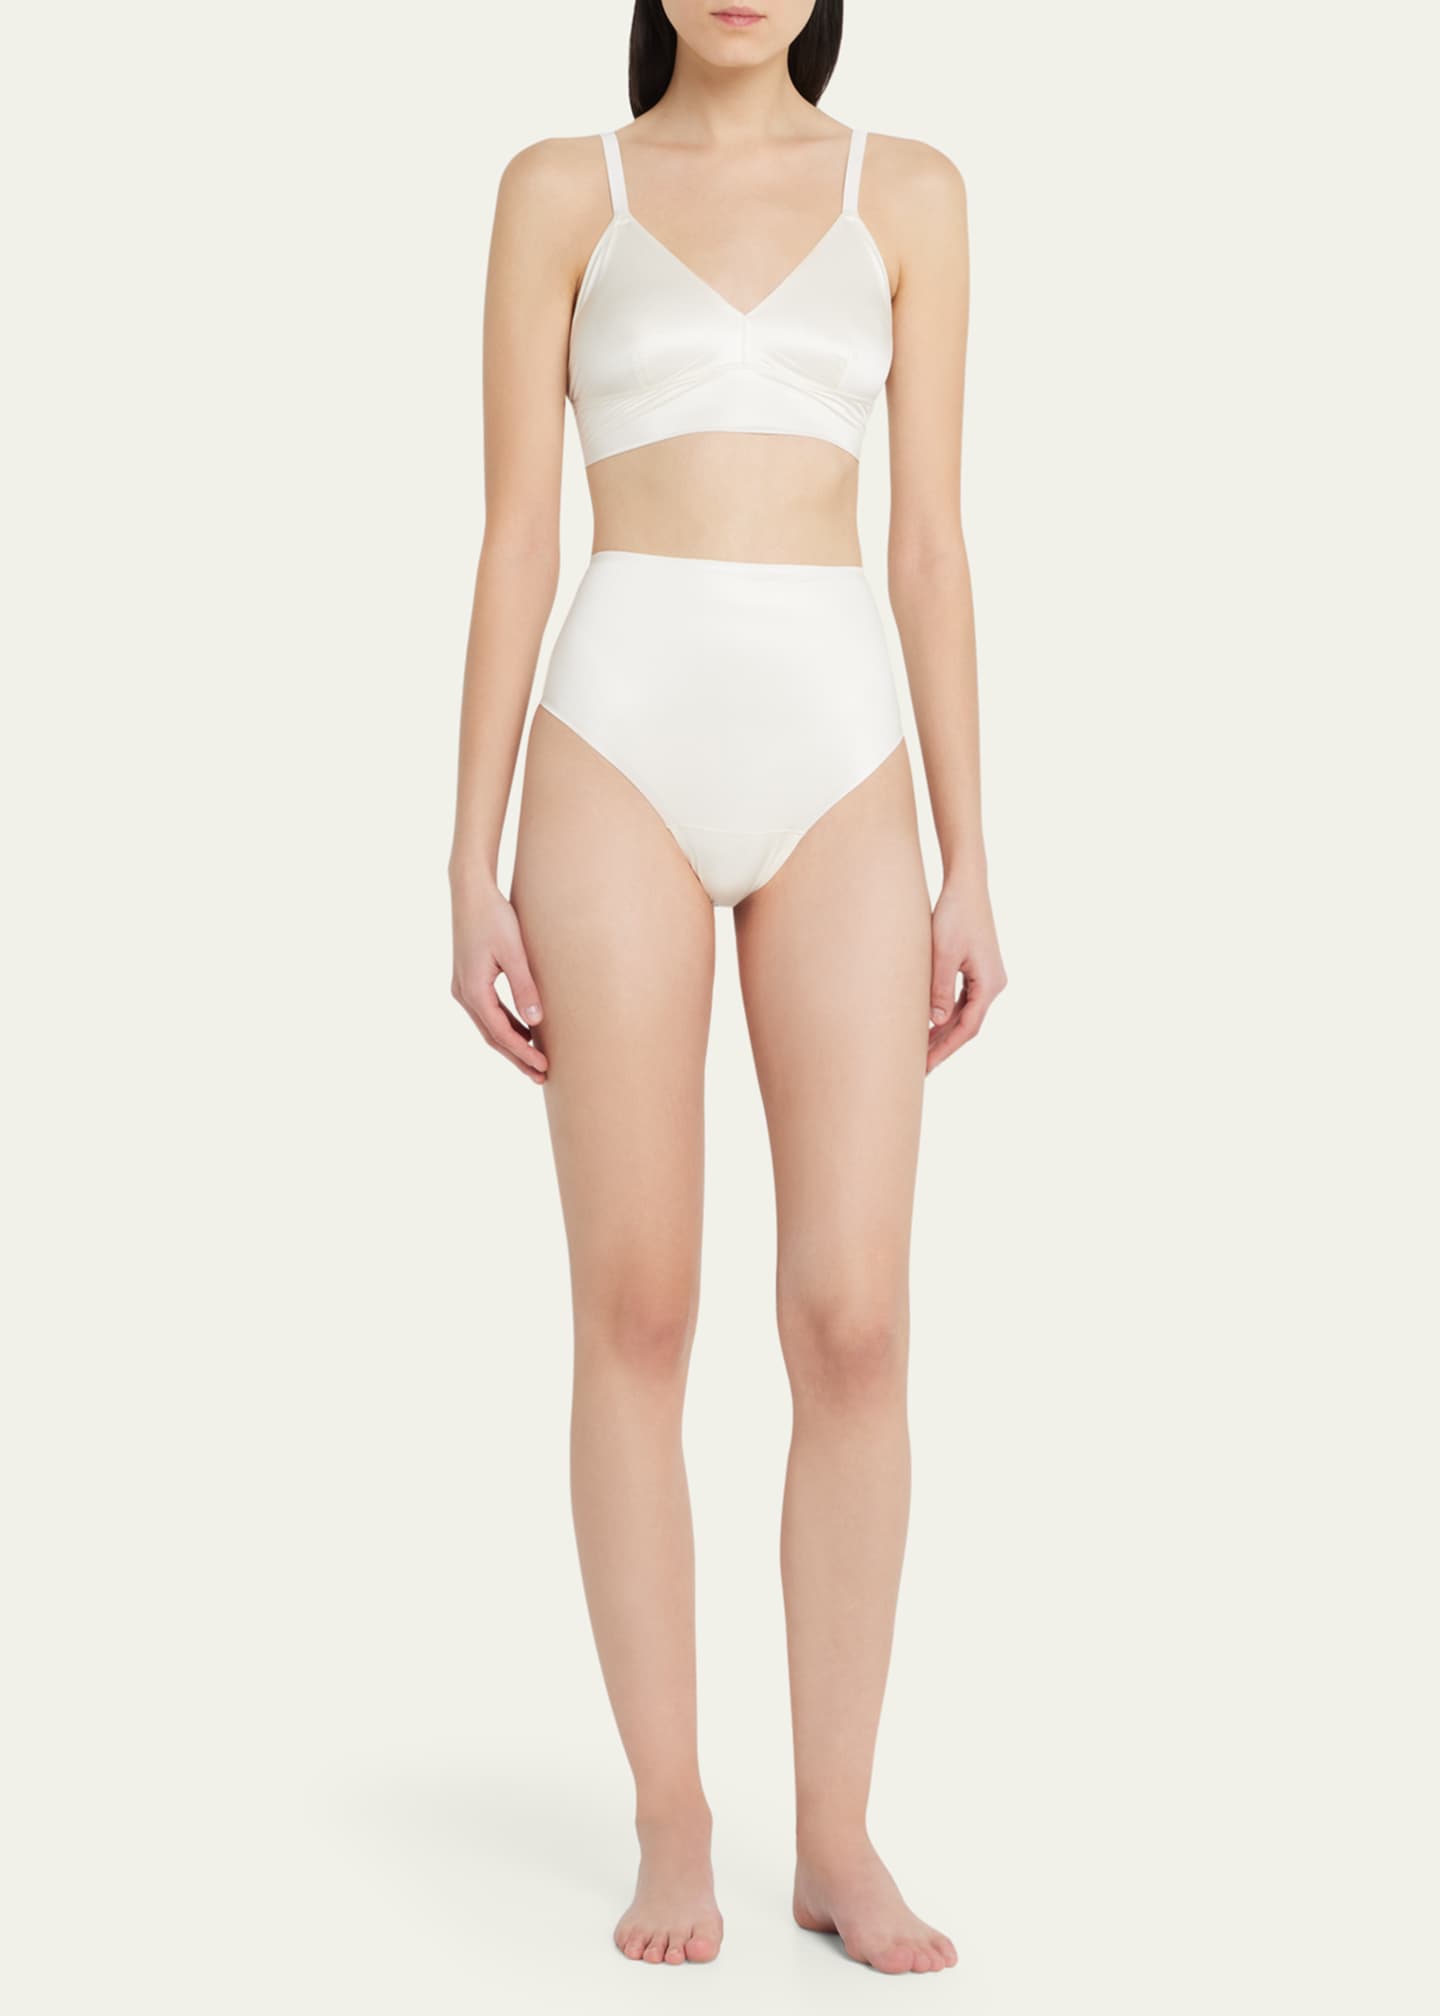 Spanx Plus Size Suit Your Fancy High-Waisted Thong - Bergdorf Goodman